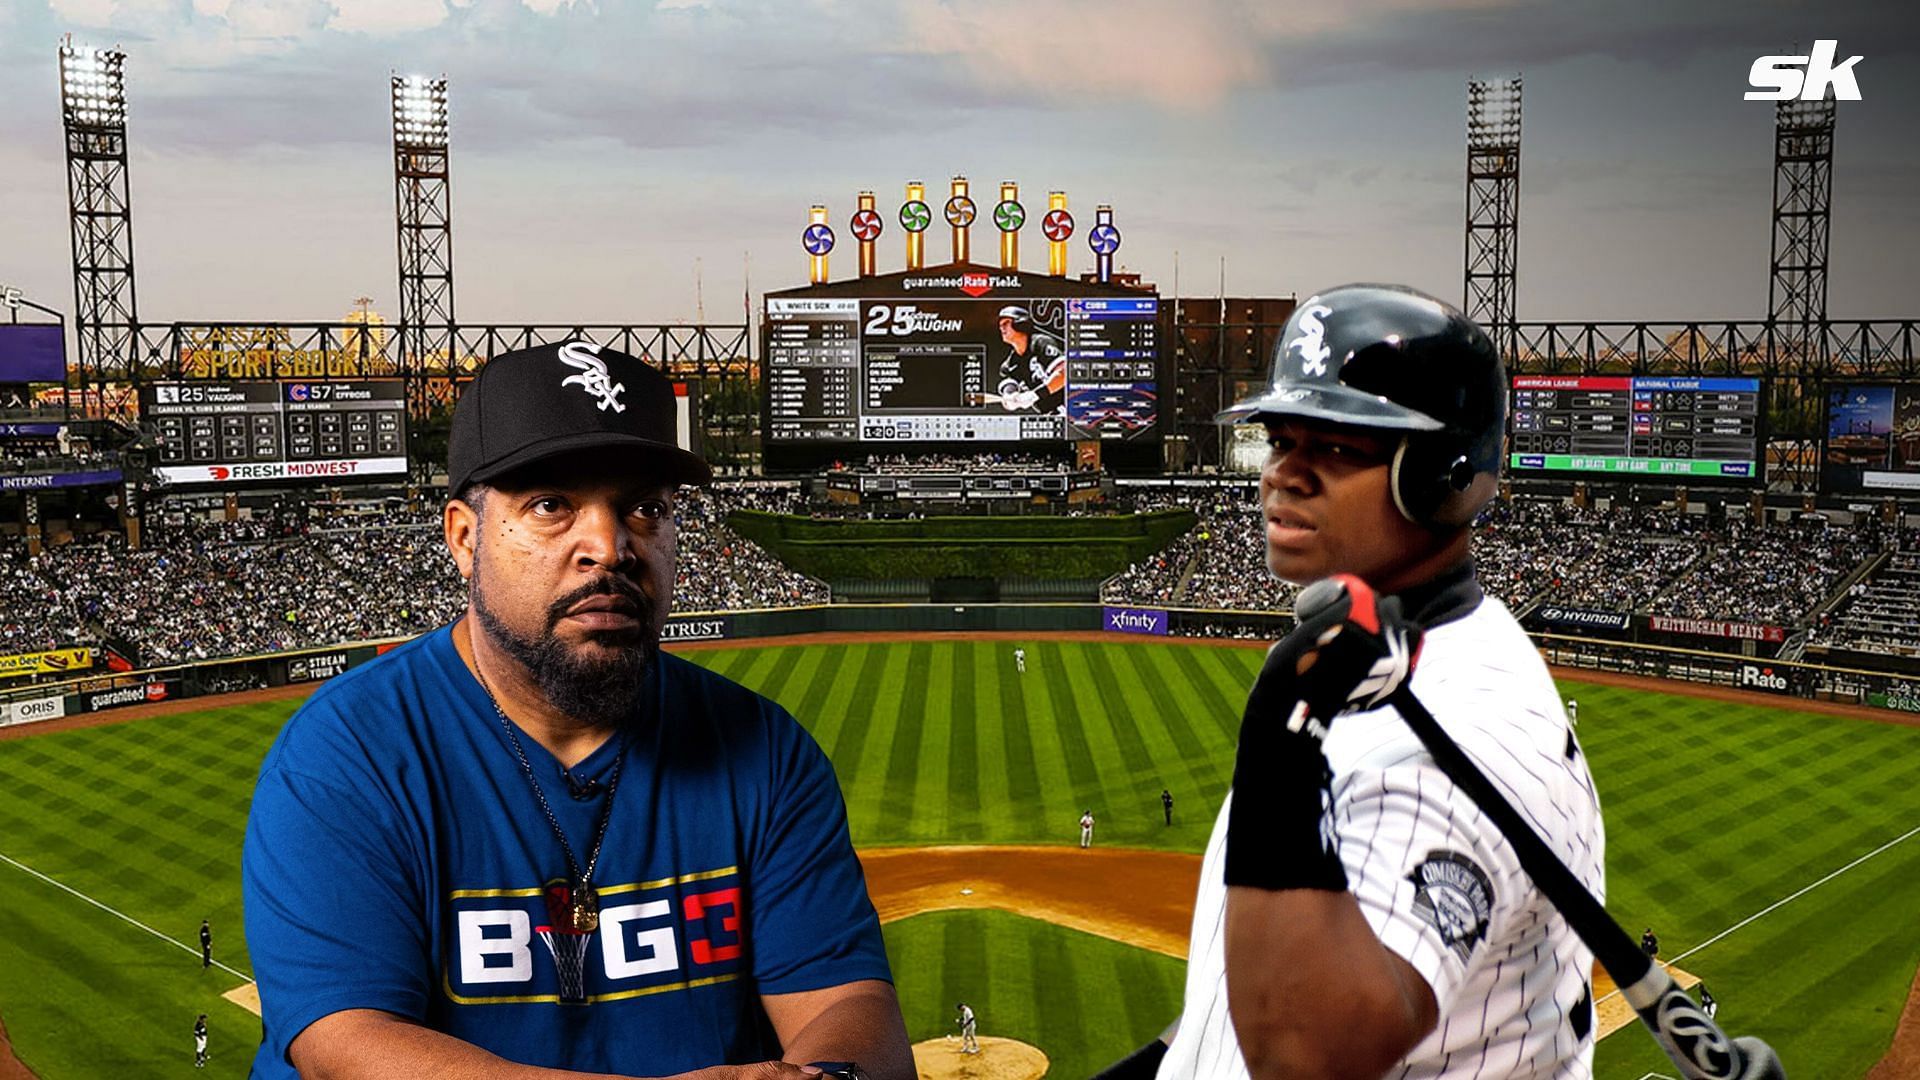 Ice Cube White Sox Hat: Fact Check: Did legendary rapper Ice Cube